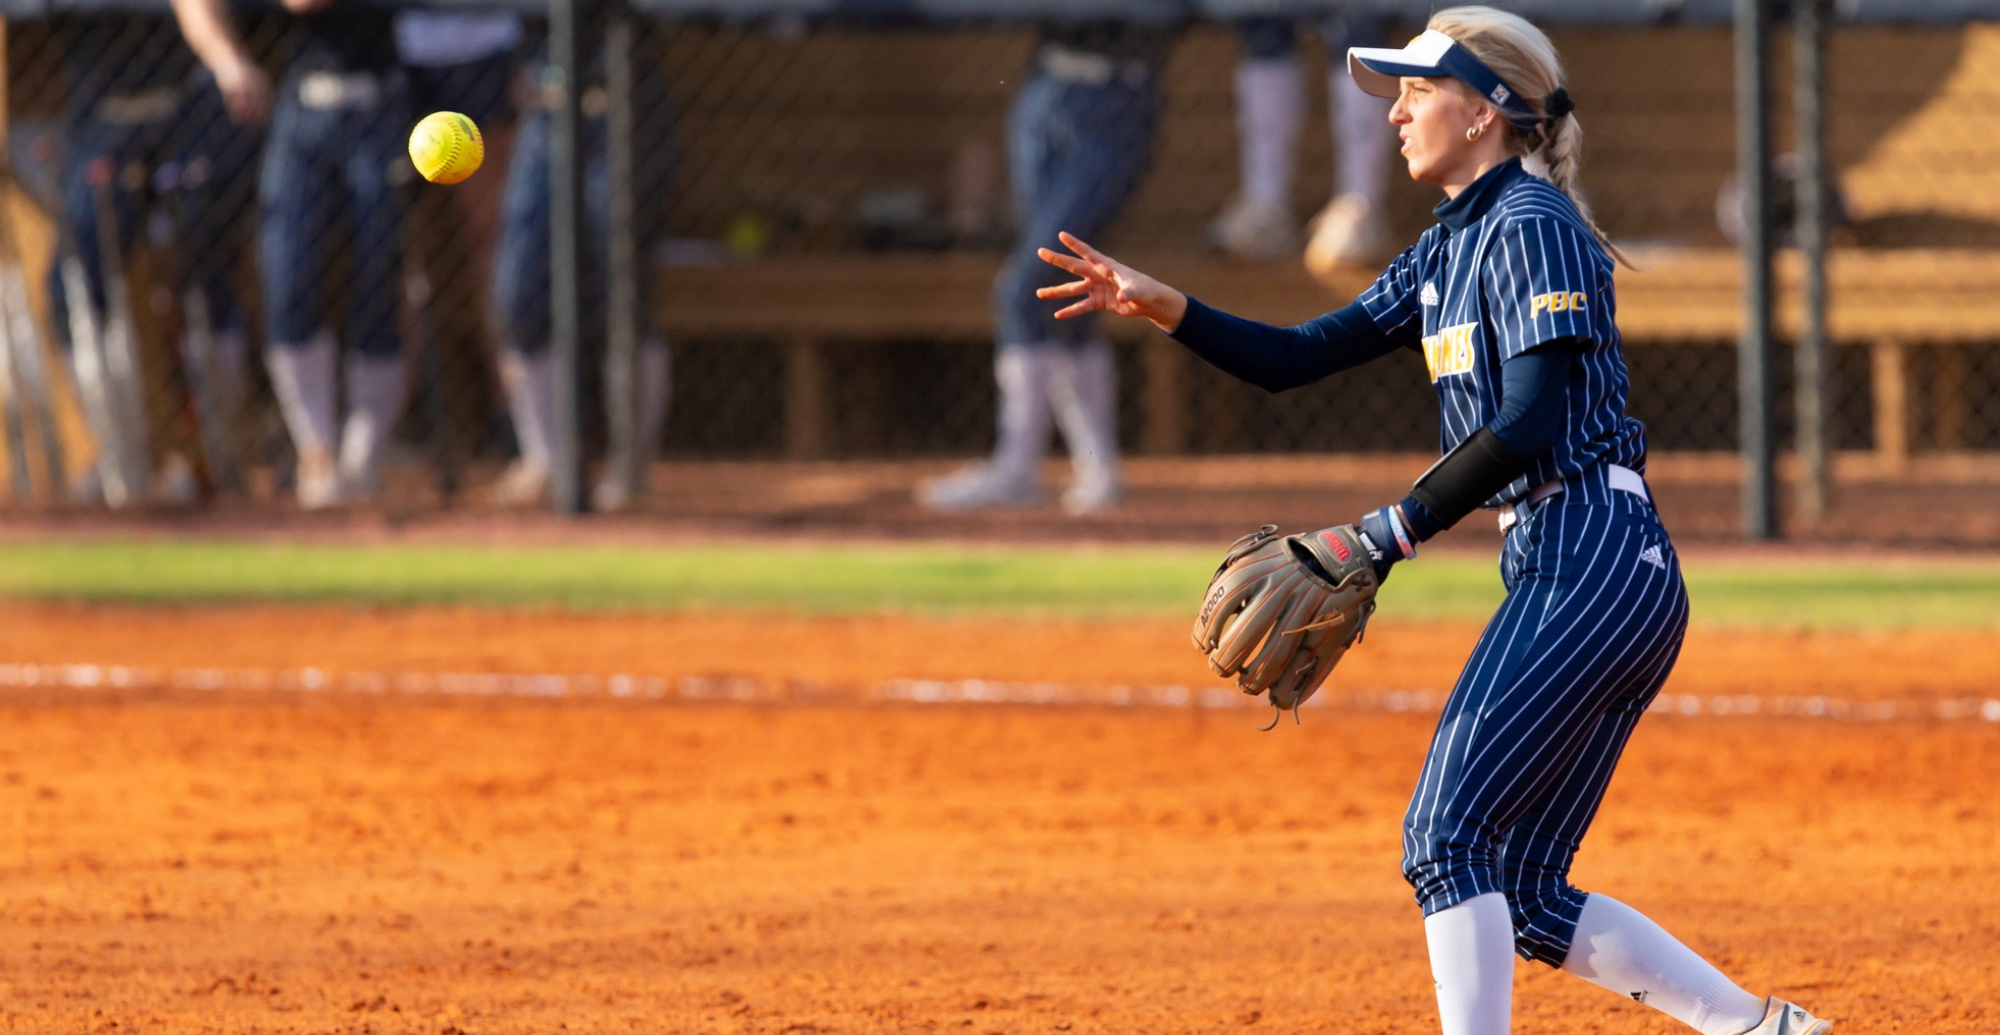 Lady Canes Storm Back for Series Win